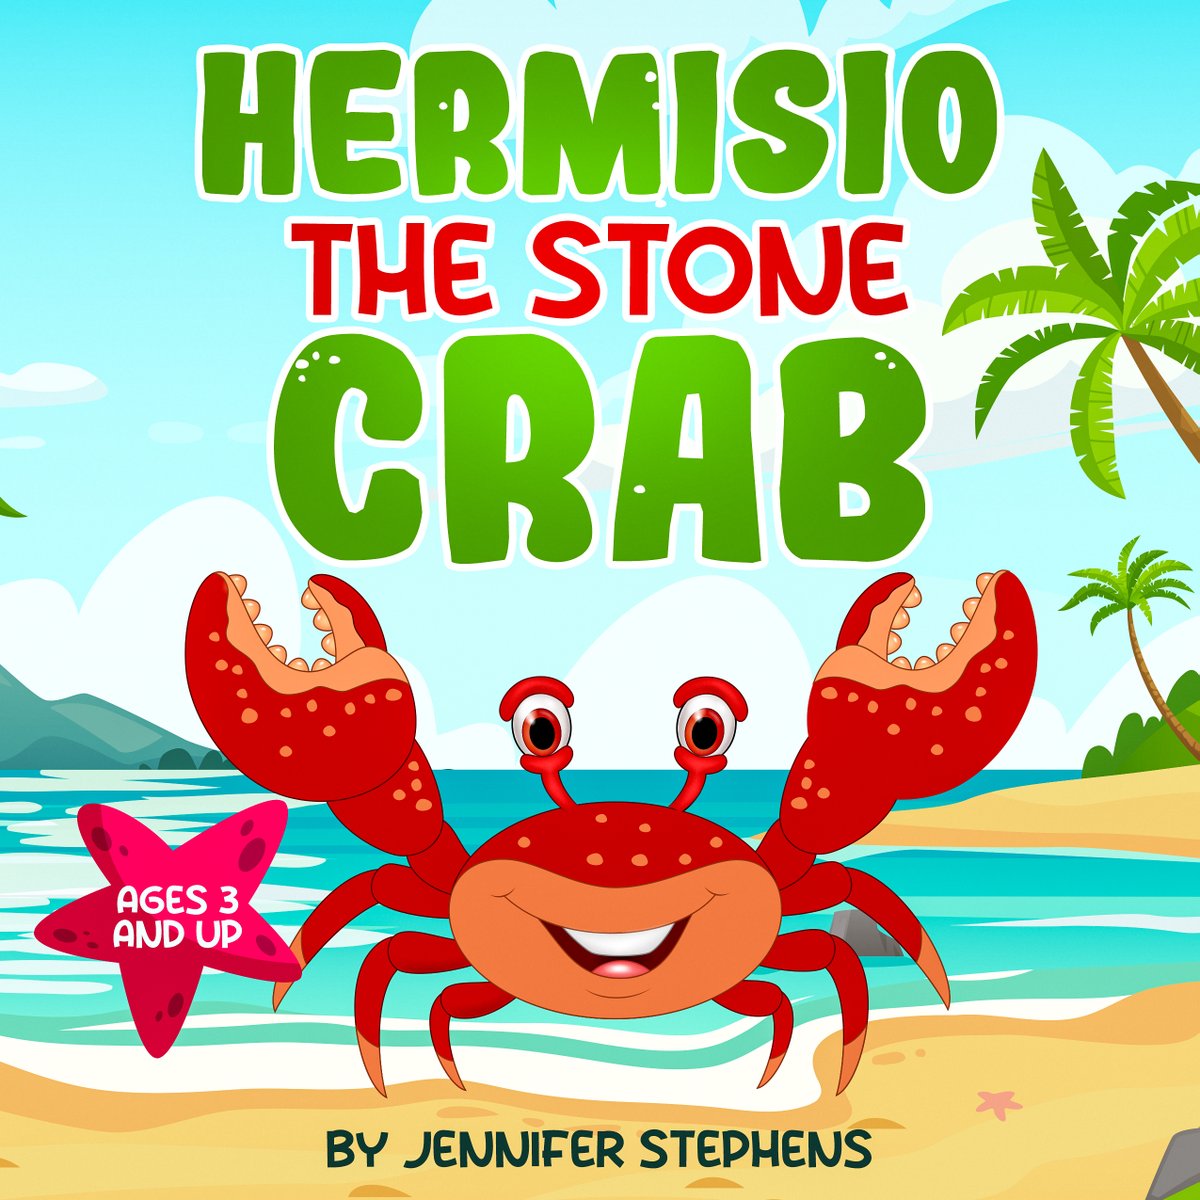 This is a great book to give your kids, especially during vacations and a day at the beach.  

amzn.to/3lP2q85

#ChildrensBooks #Books #kidsbooks #childrensliterature #moms #teachers #childrens #storytime #parents #Dads